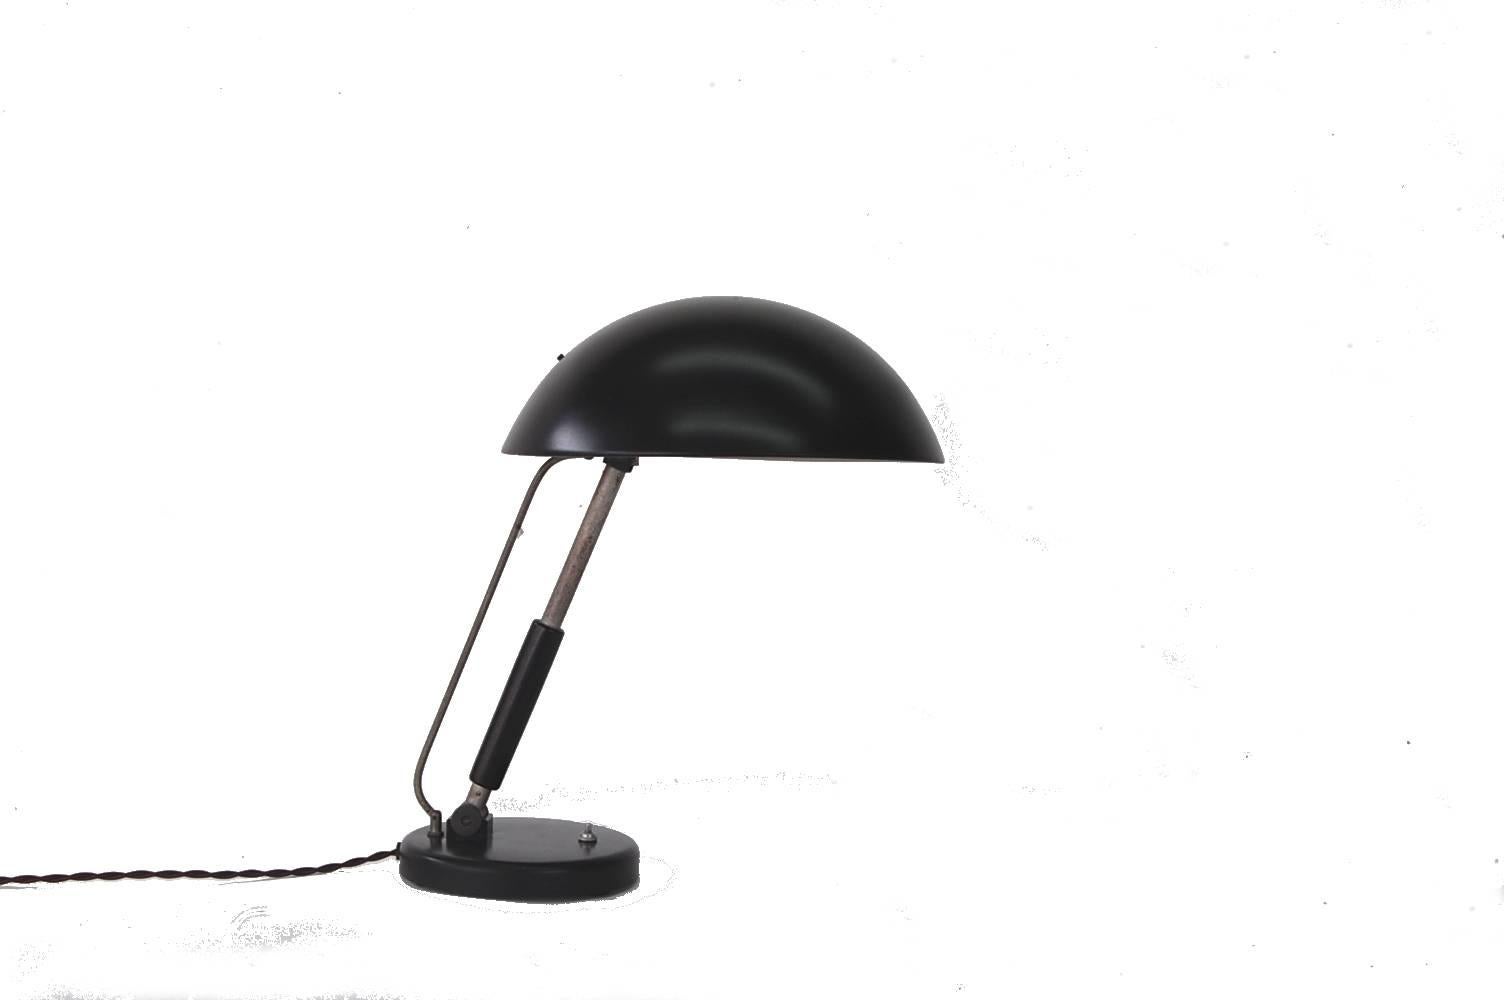 Karl Trabert desk lamp 1930 G. Schanzenbach & Co. Frankfurt a.M., Model 81126. Lamp's shade position is adjustable.

Completely rewired, including cloth covered cord.